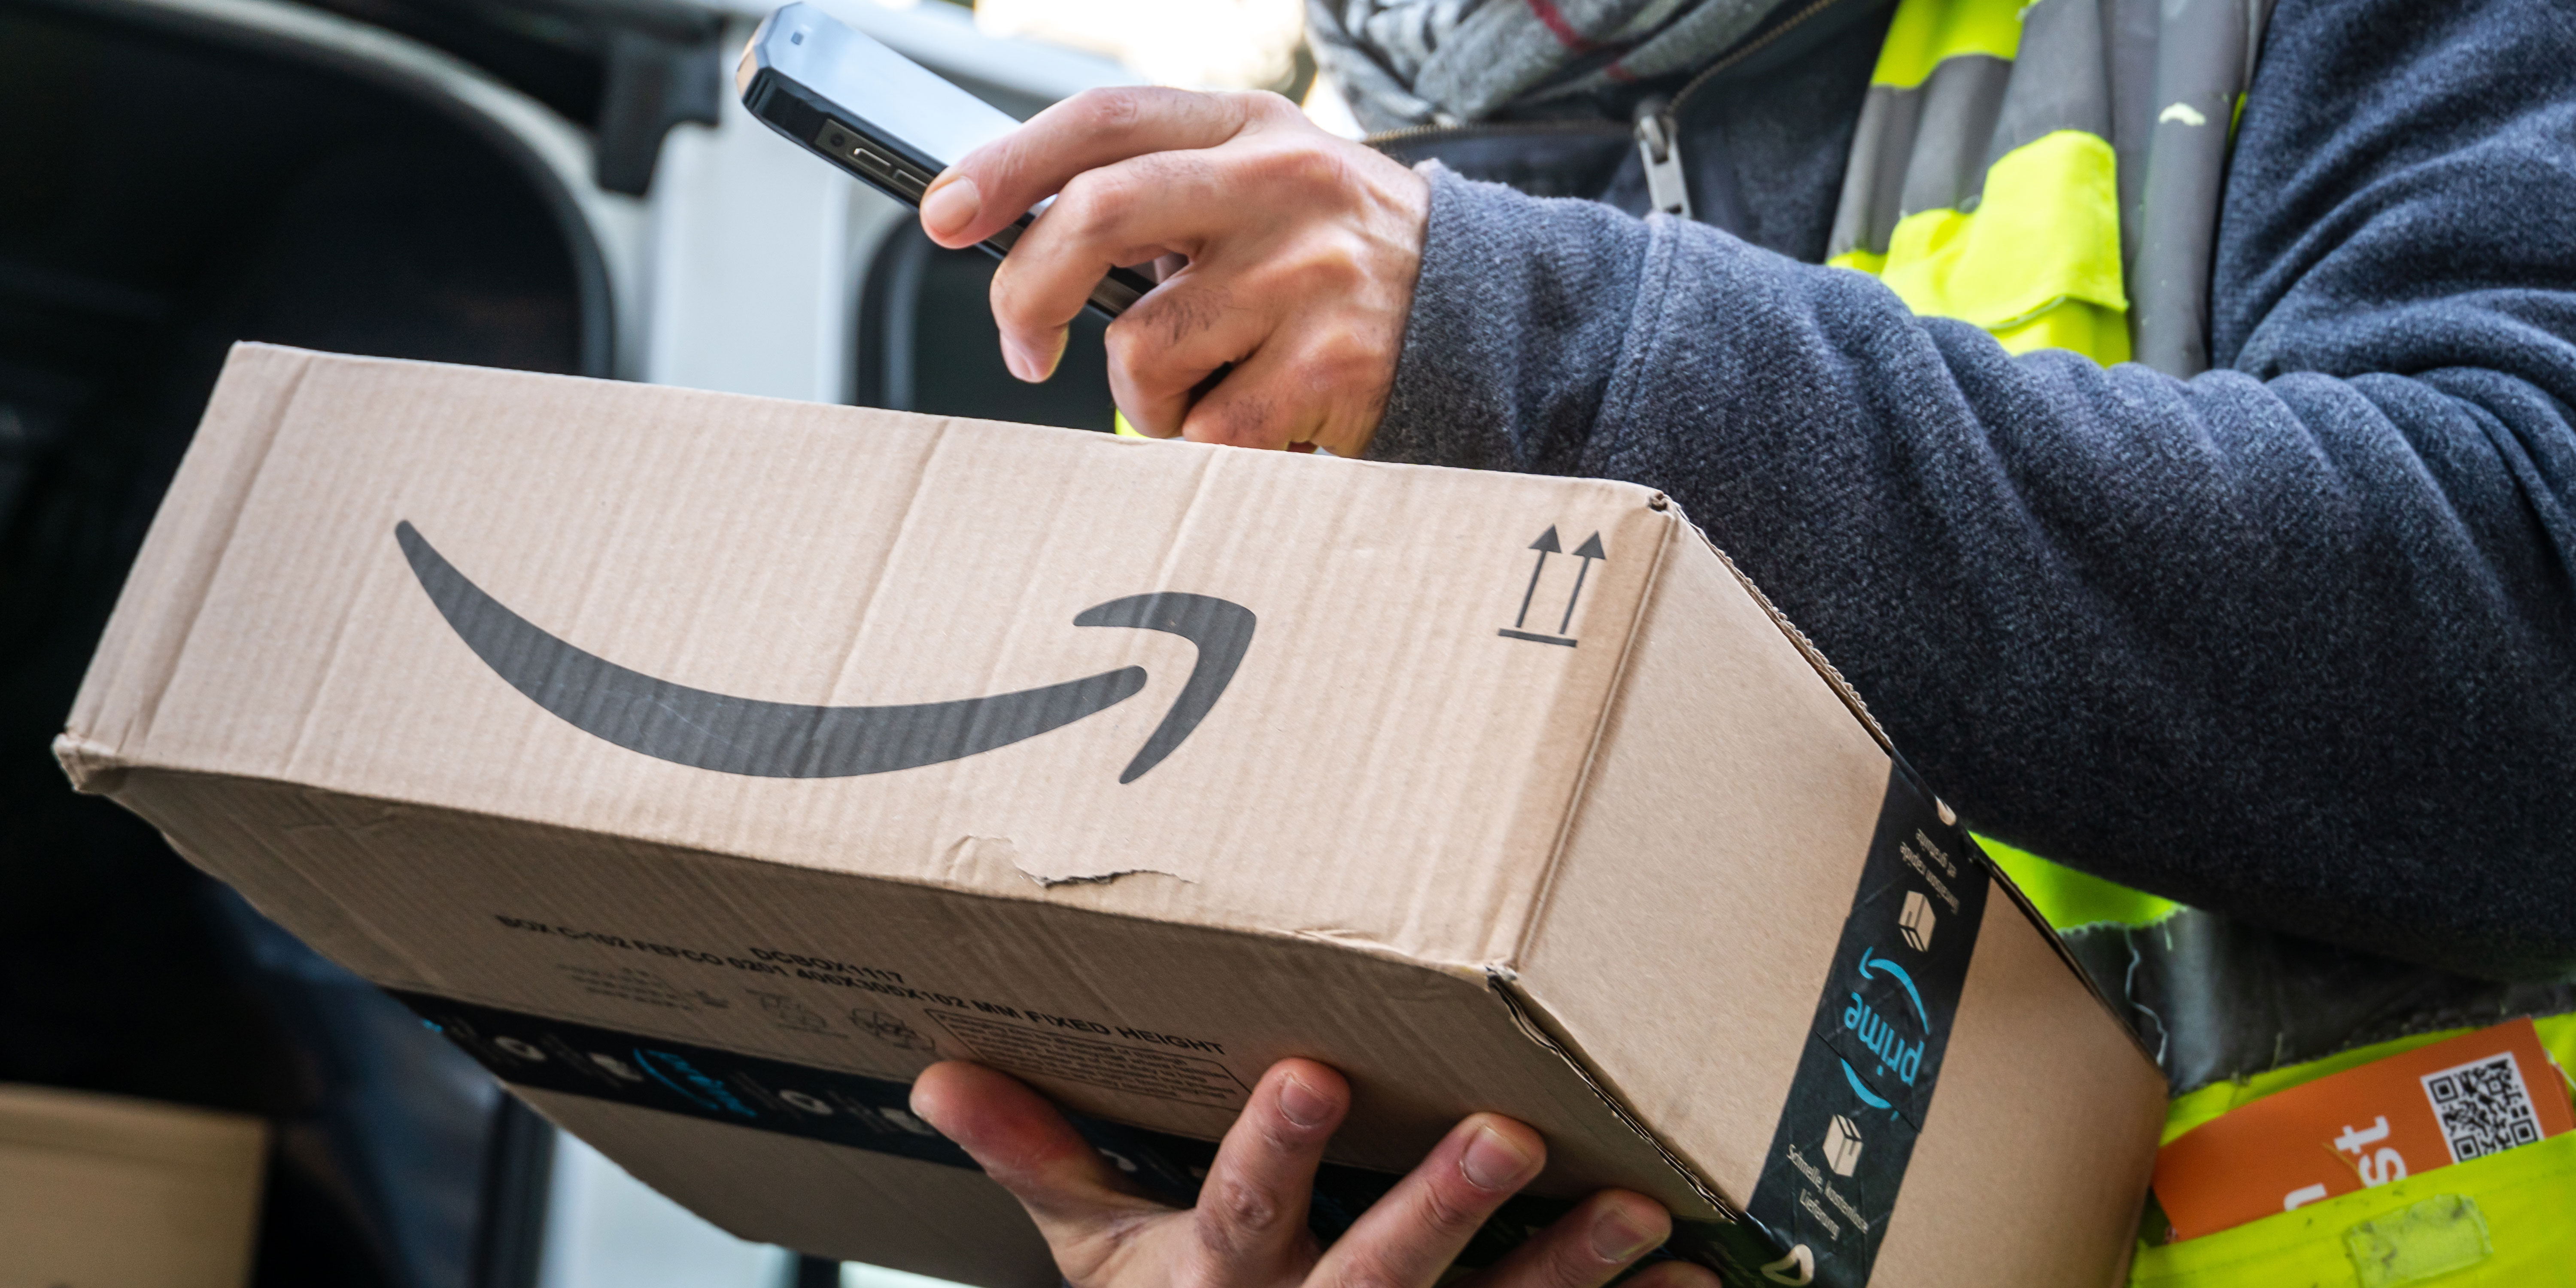 Accidentally signed up to Amazon Prime? You're not alone